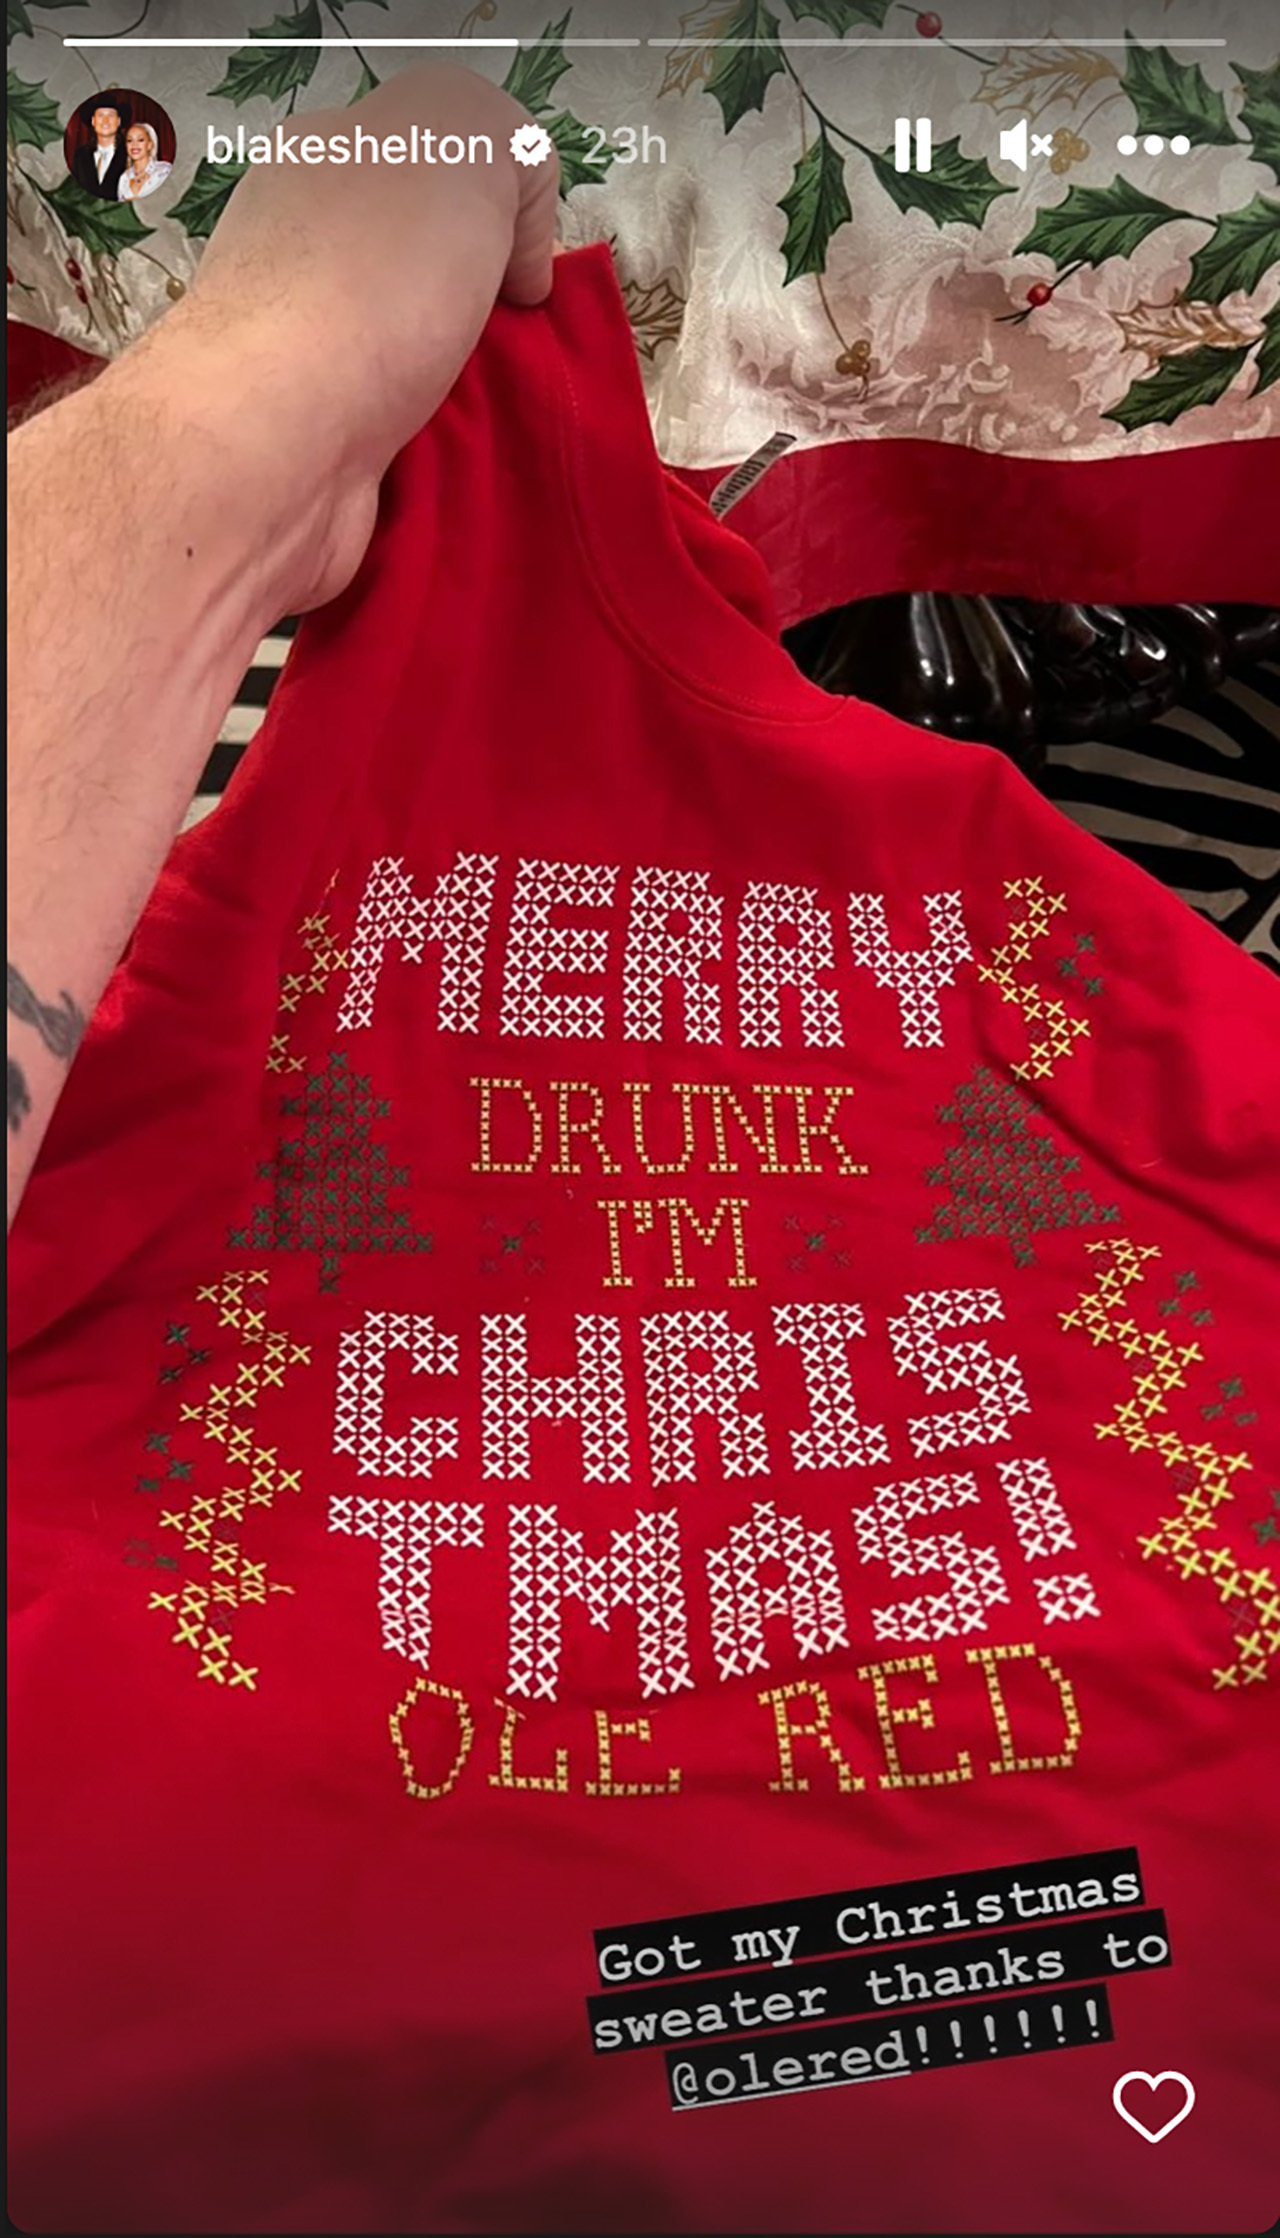 Ole Red Christmas Sweater from Blake Shelton.